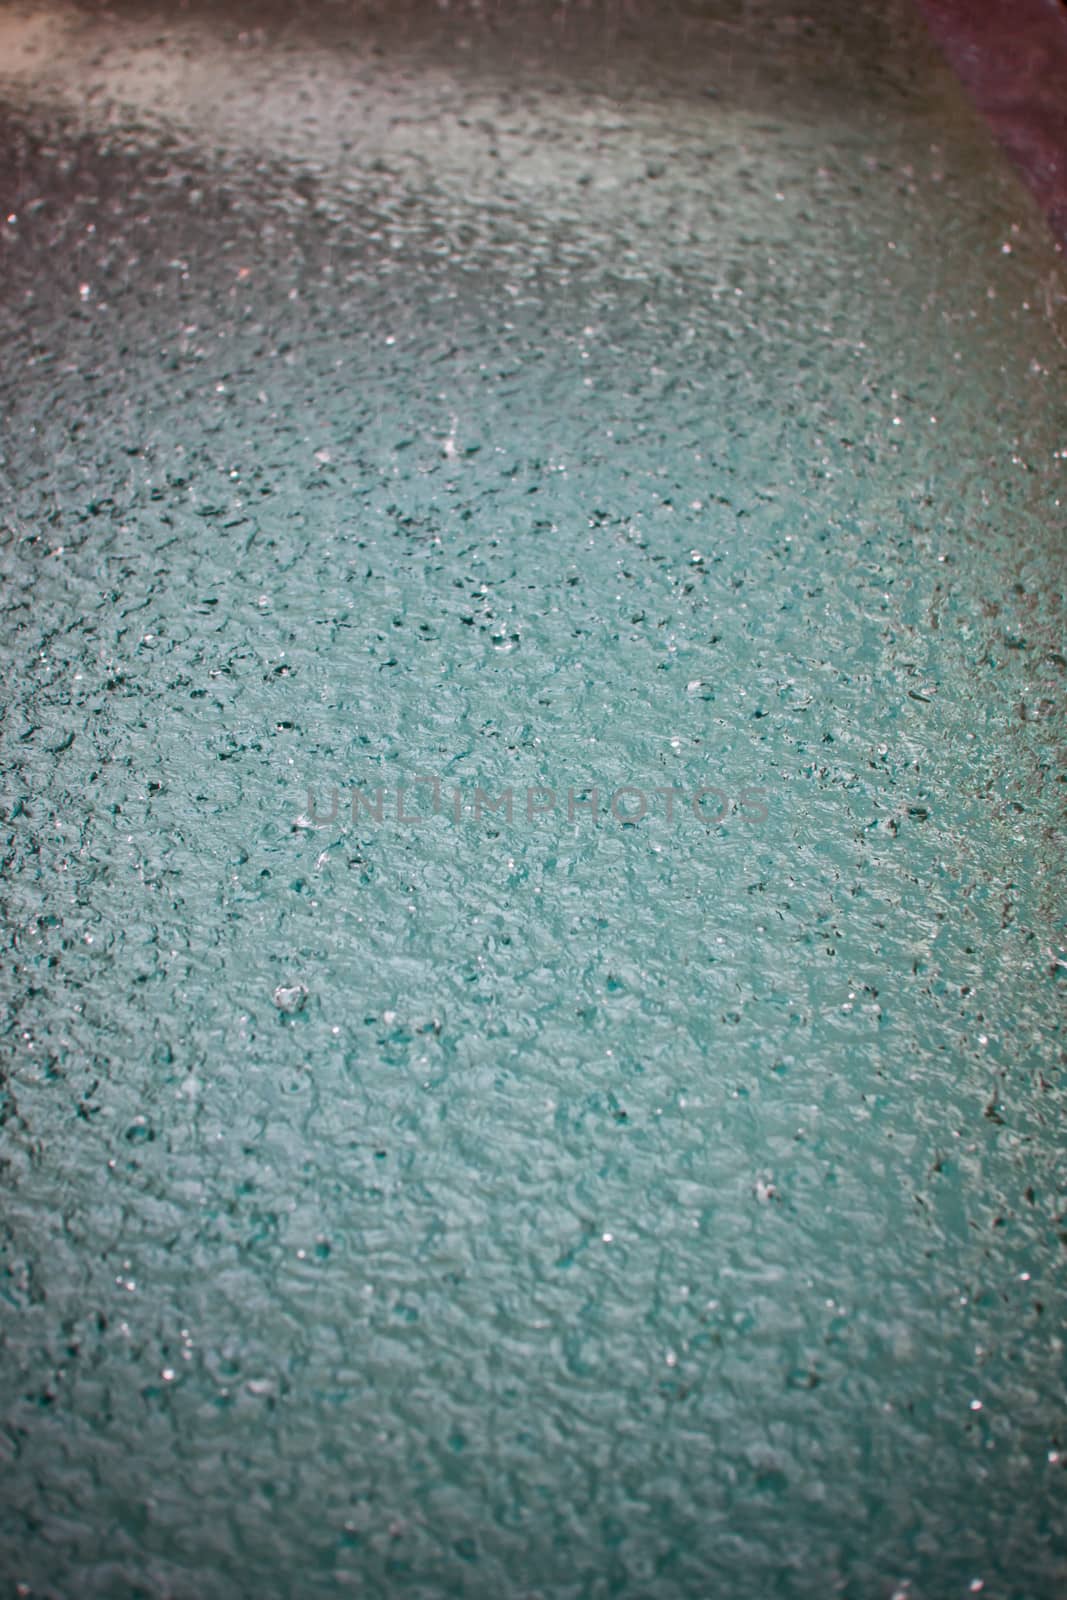 Raindrops falling on the surface of a pool or puddle water creating a textured pattern for a cool natural background